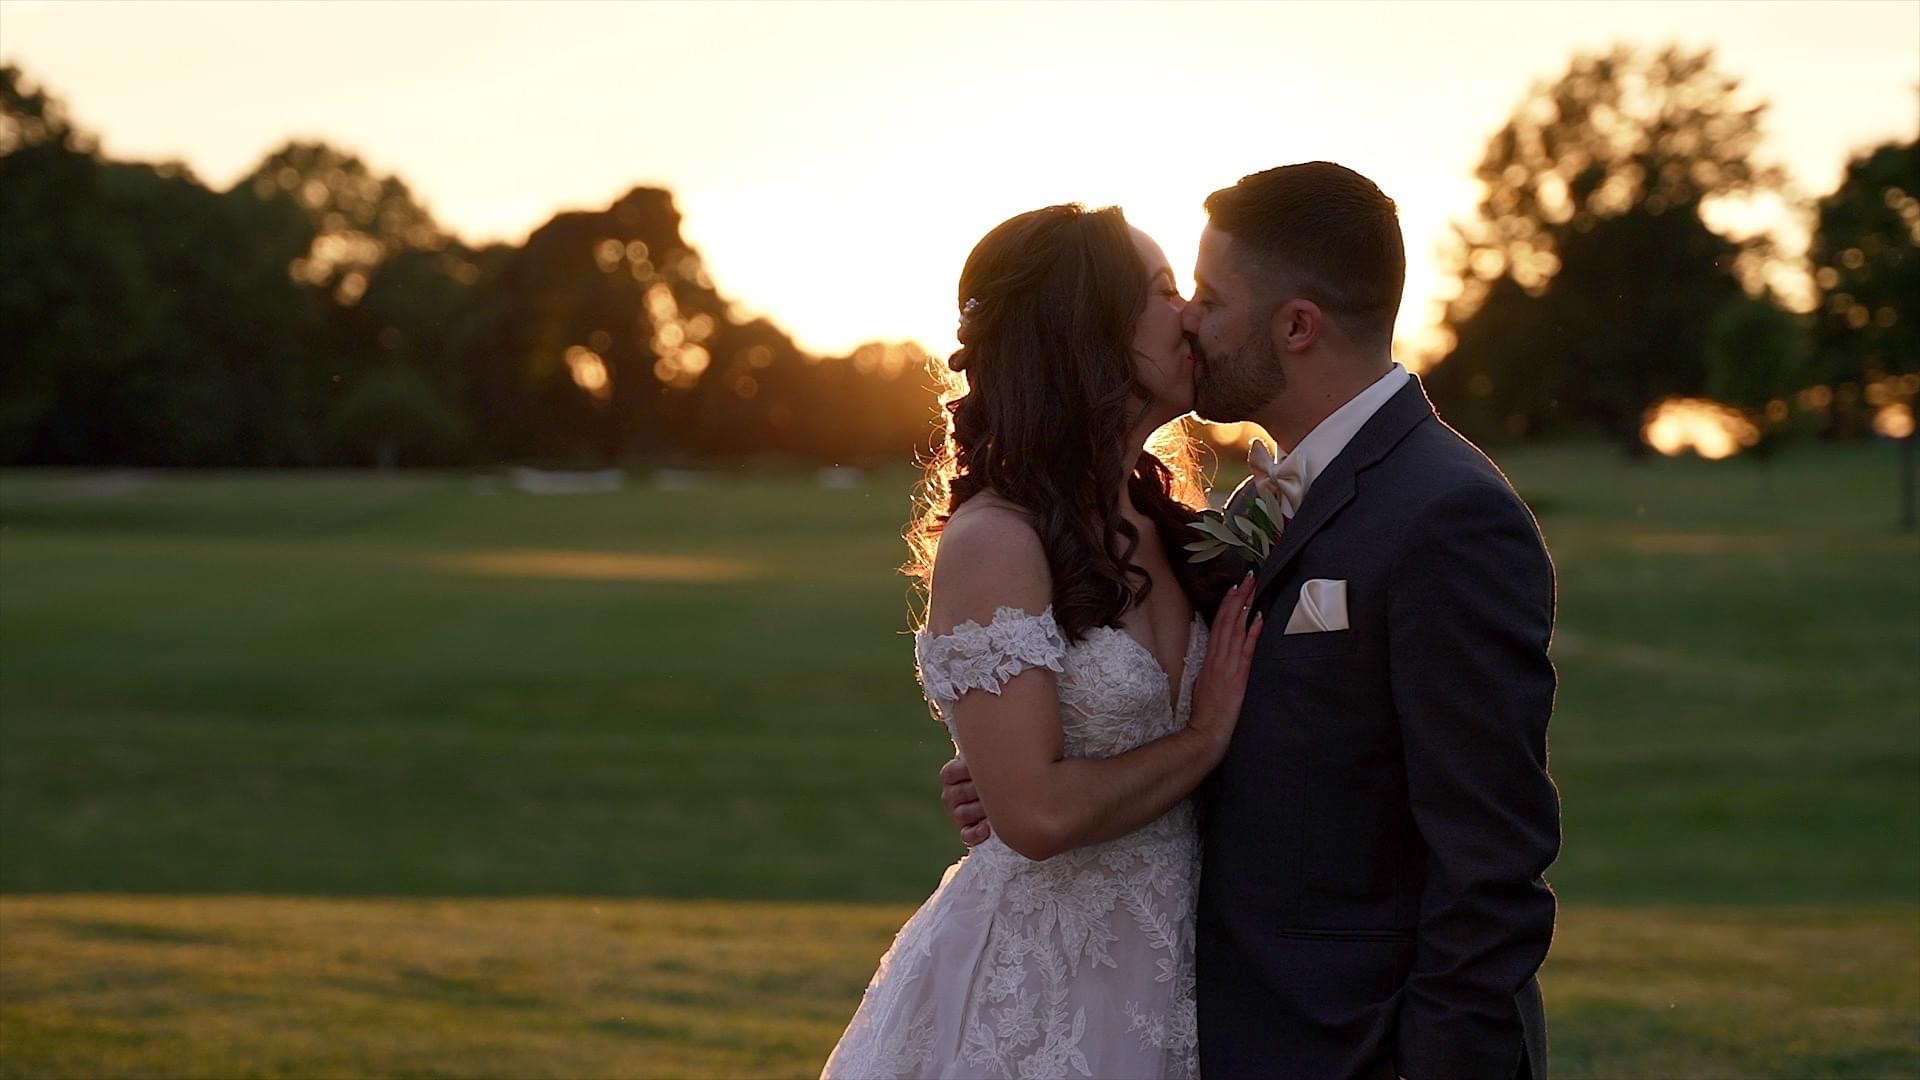 White couple kissing in front of a sunset. The sun is setting behind the trees. The groom has one arm around the bride's waist. The groom is wearing a grey suit with a pink bow tie. Bride is wearing an off the shoulder dress made of lace